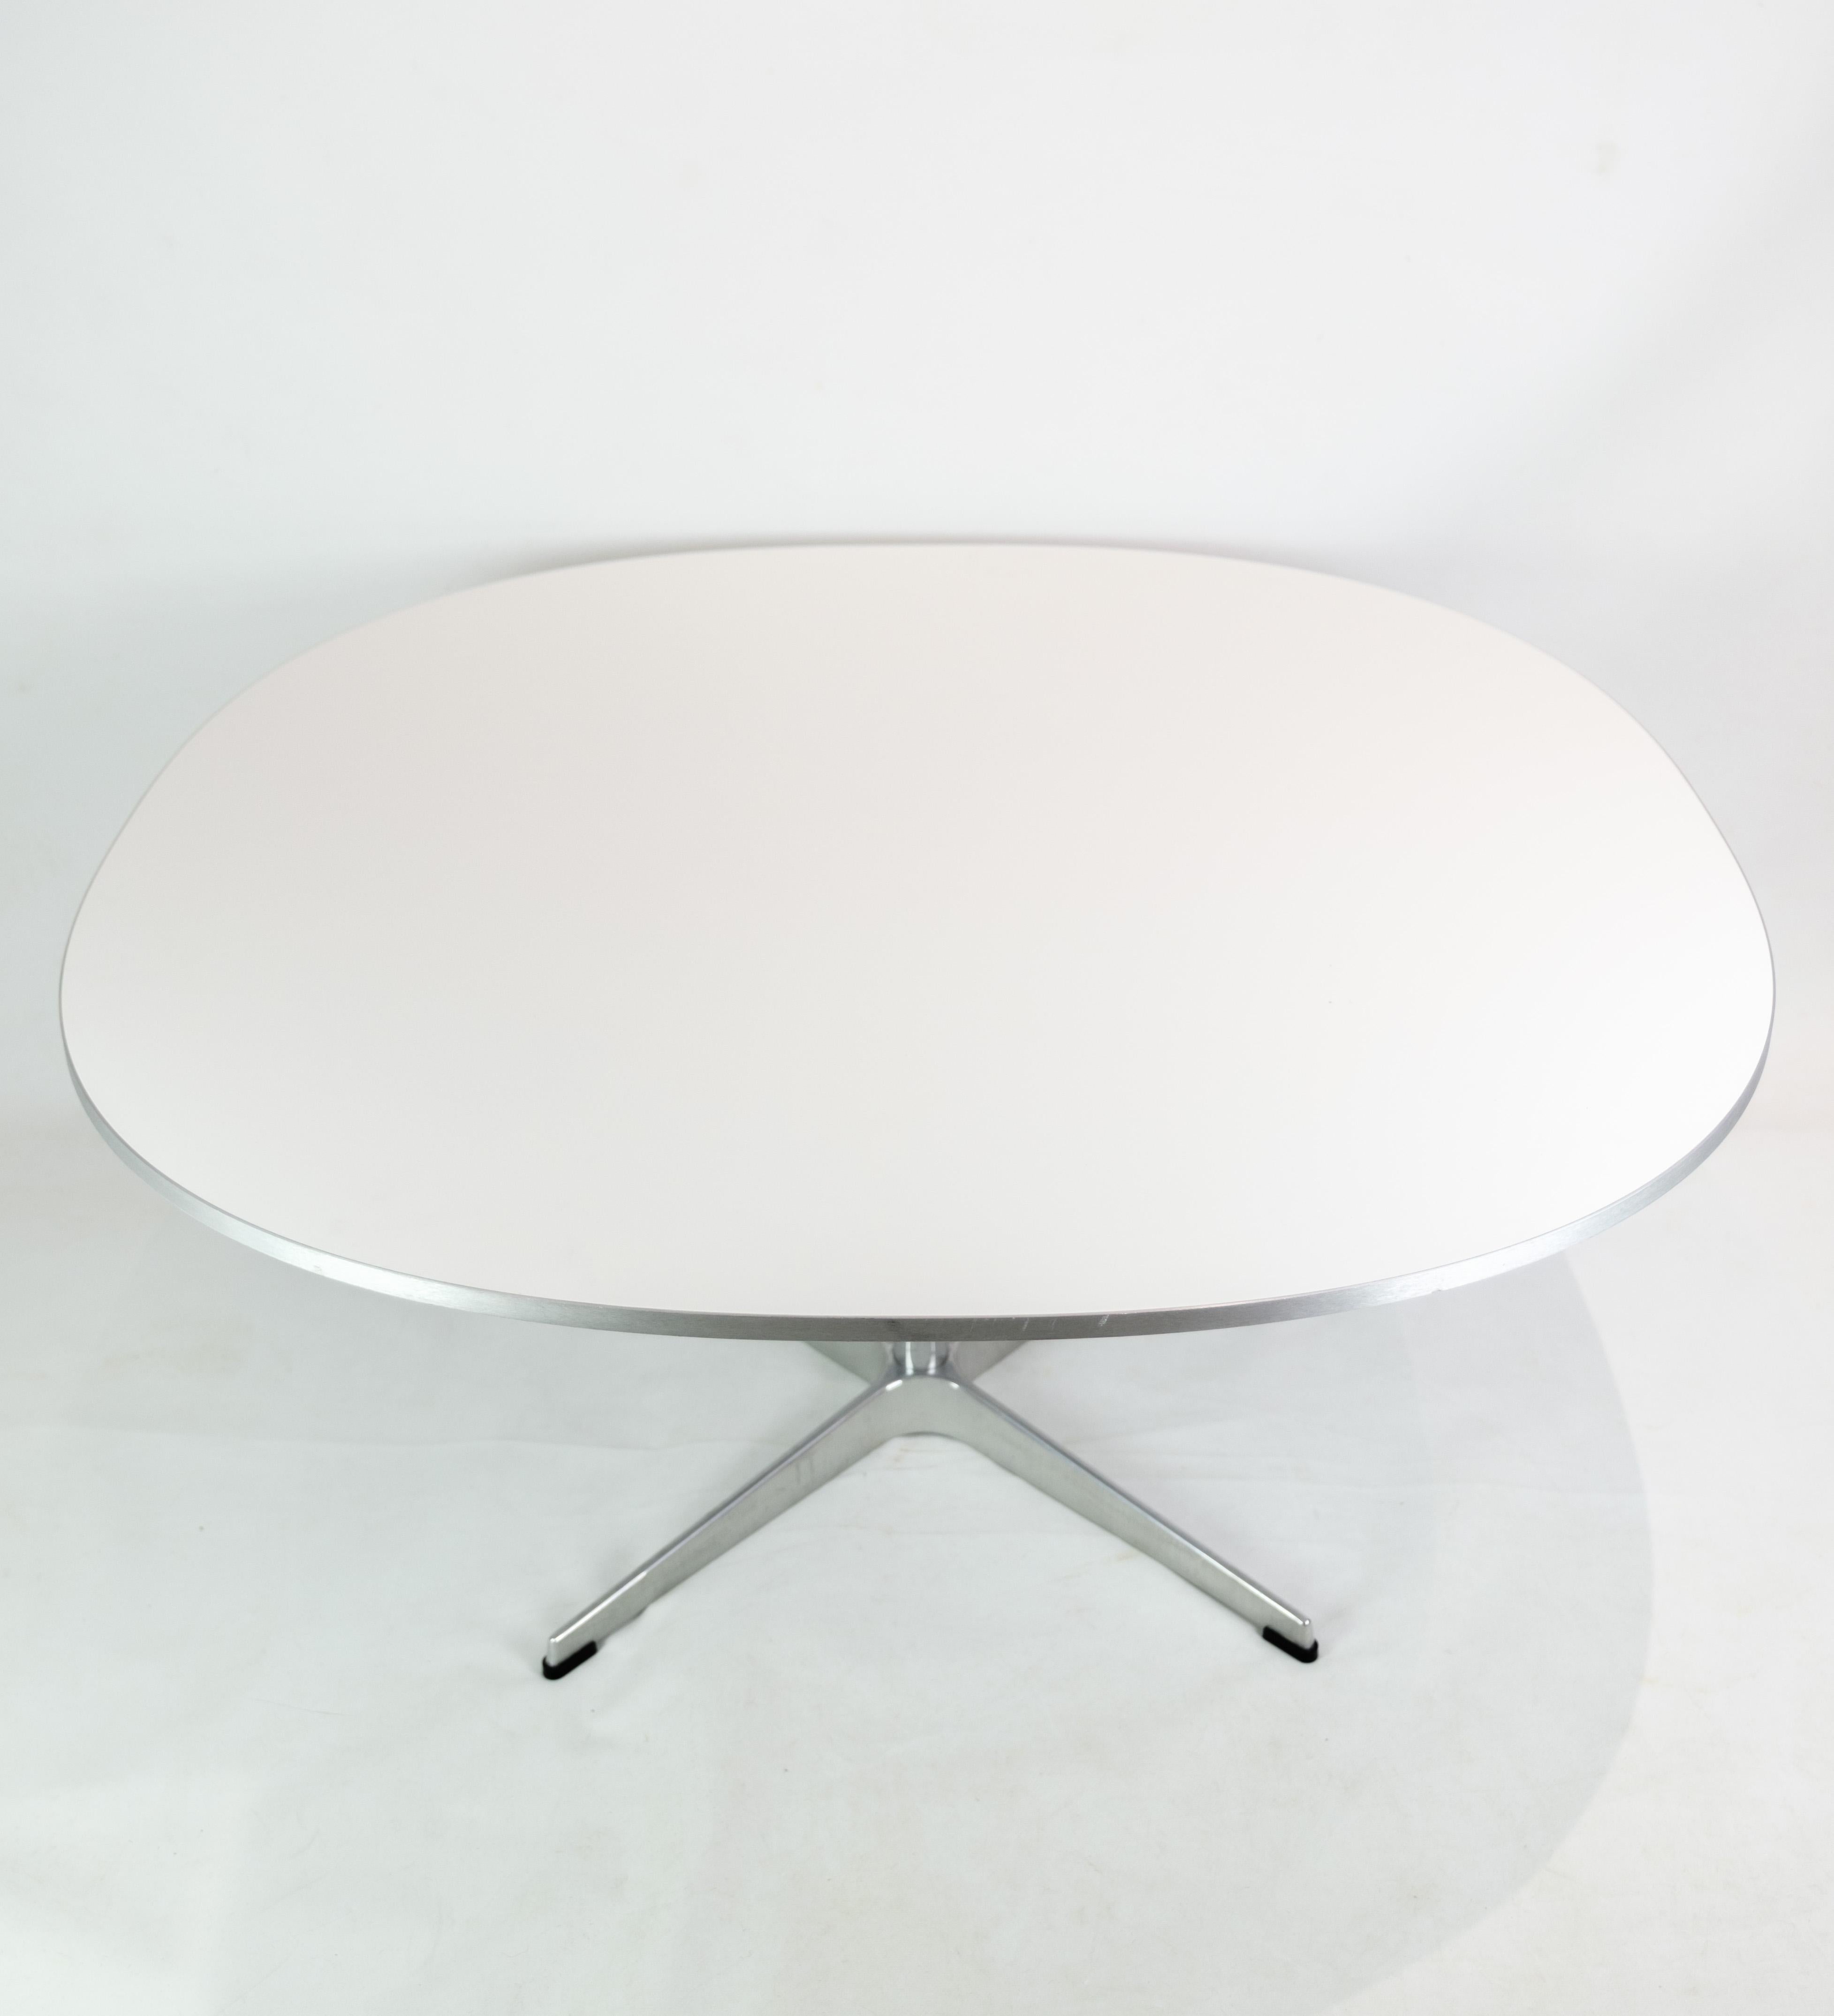 Coffee table, designed by Piet Hein/Bruno Mathsson/Arne Jacobsen and produced by Fritz Hansen in 2018. The table has white laminate with aluminum silver edge, and aluminum frame. Stamped with original brand and production number.